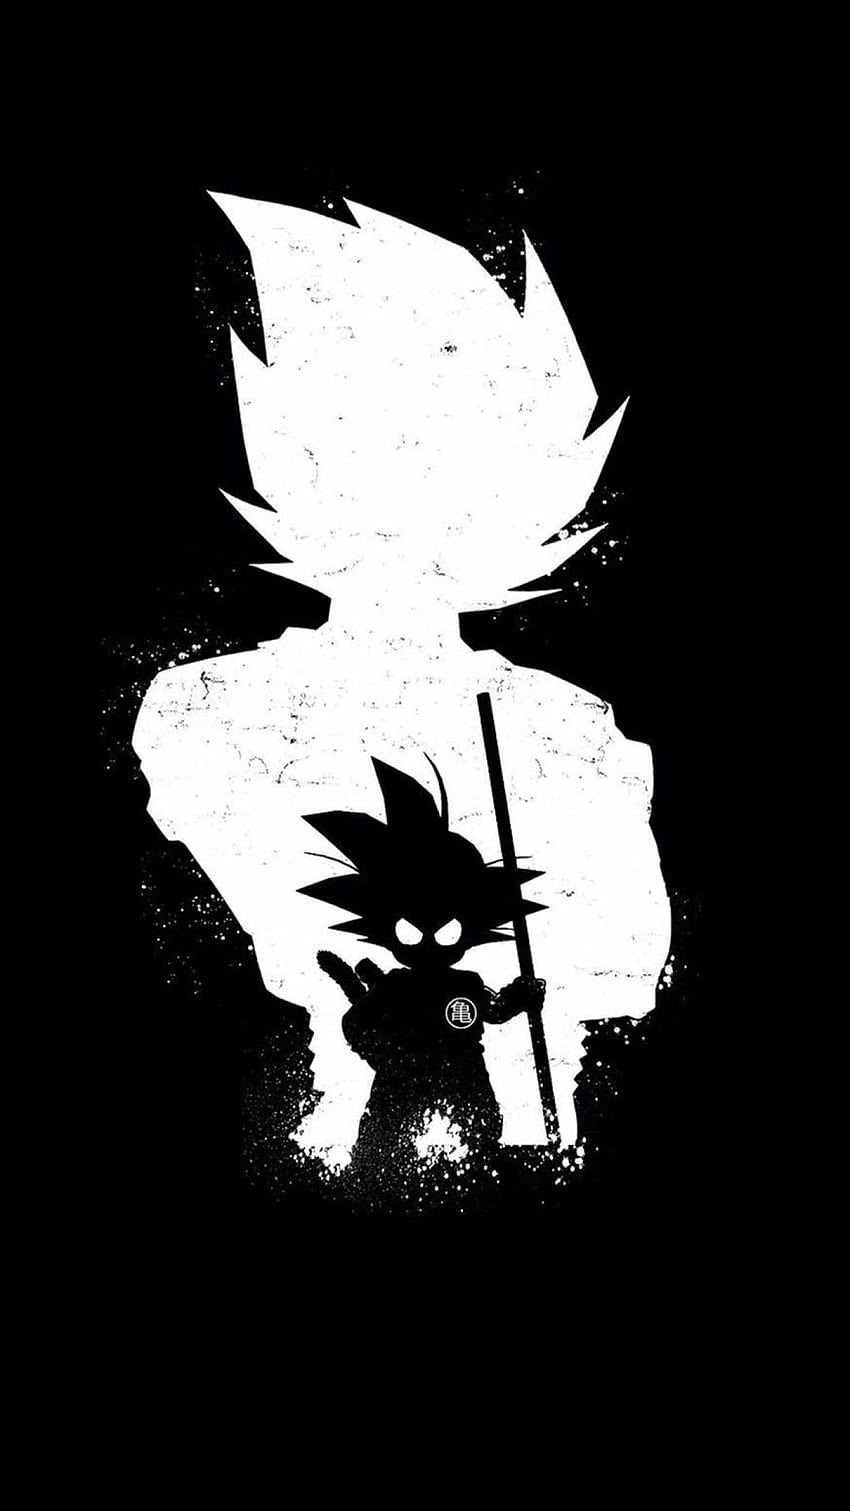 Dark • Son Goku and Vegeta silhouette, Dragon Ball, real people, lifestyles • For You The Best For & Mobile, goku black aesthetic full screen HD phone wallpaper